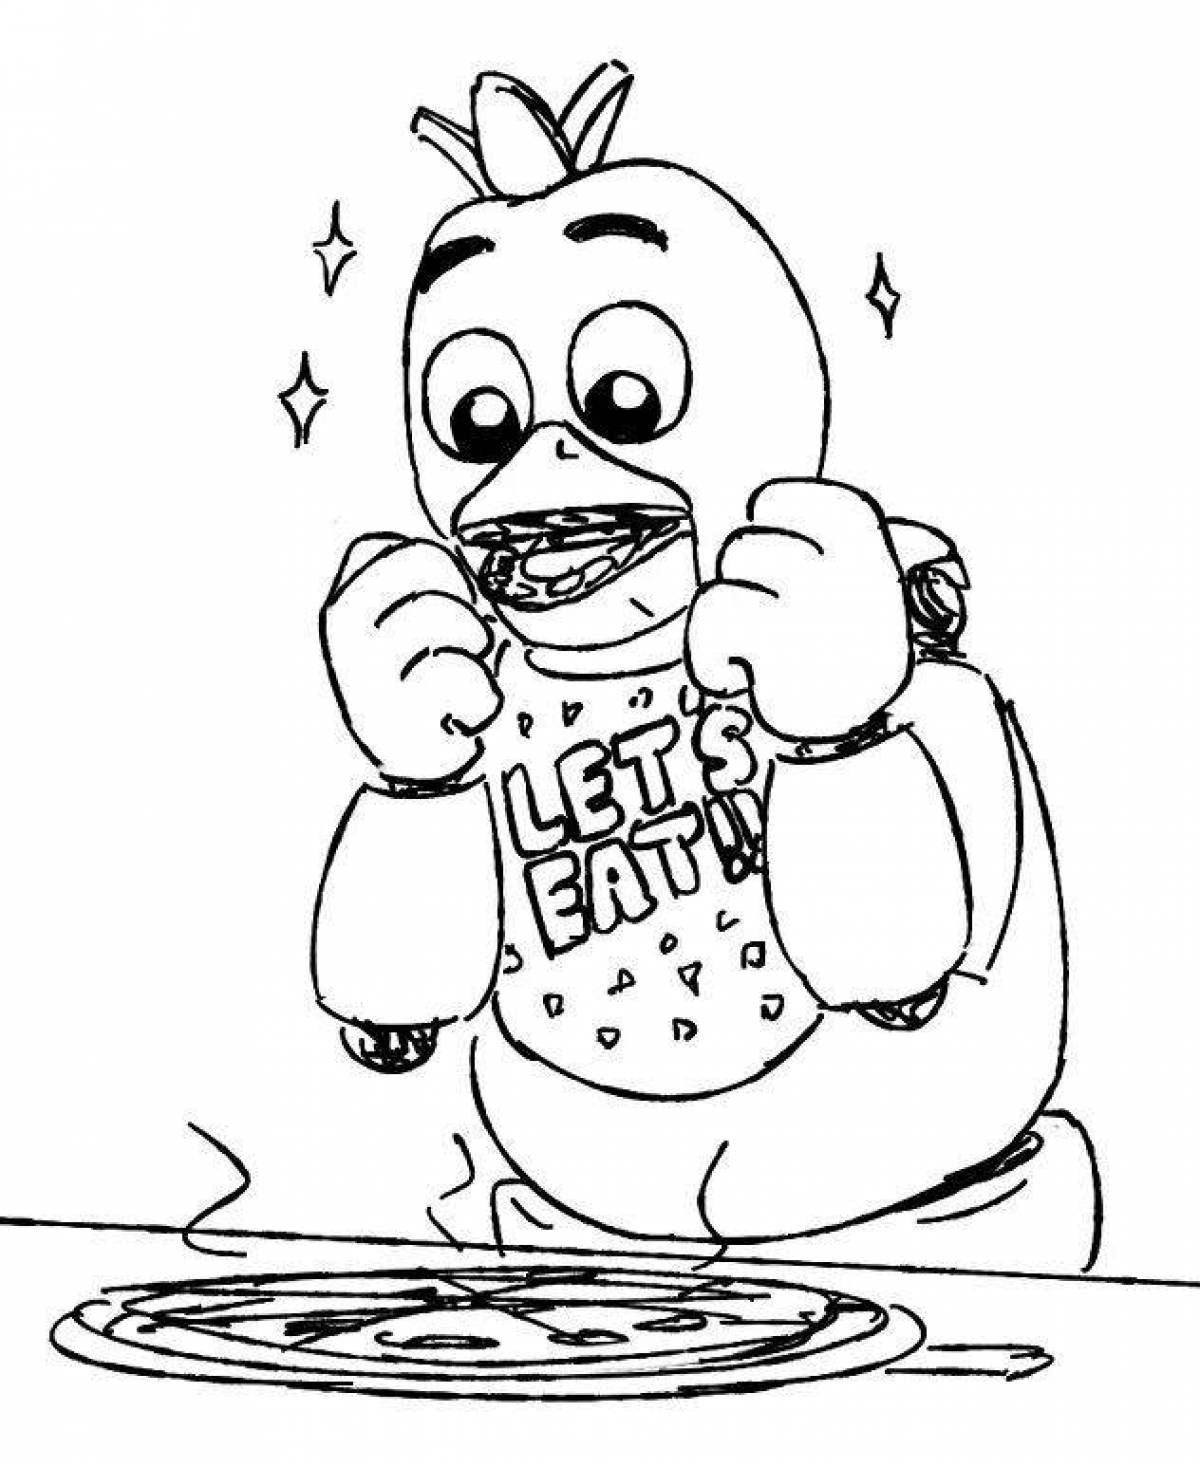 Radiant chica fnaf coloring page